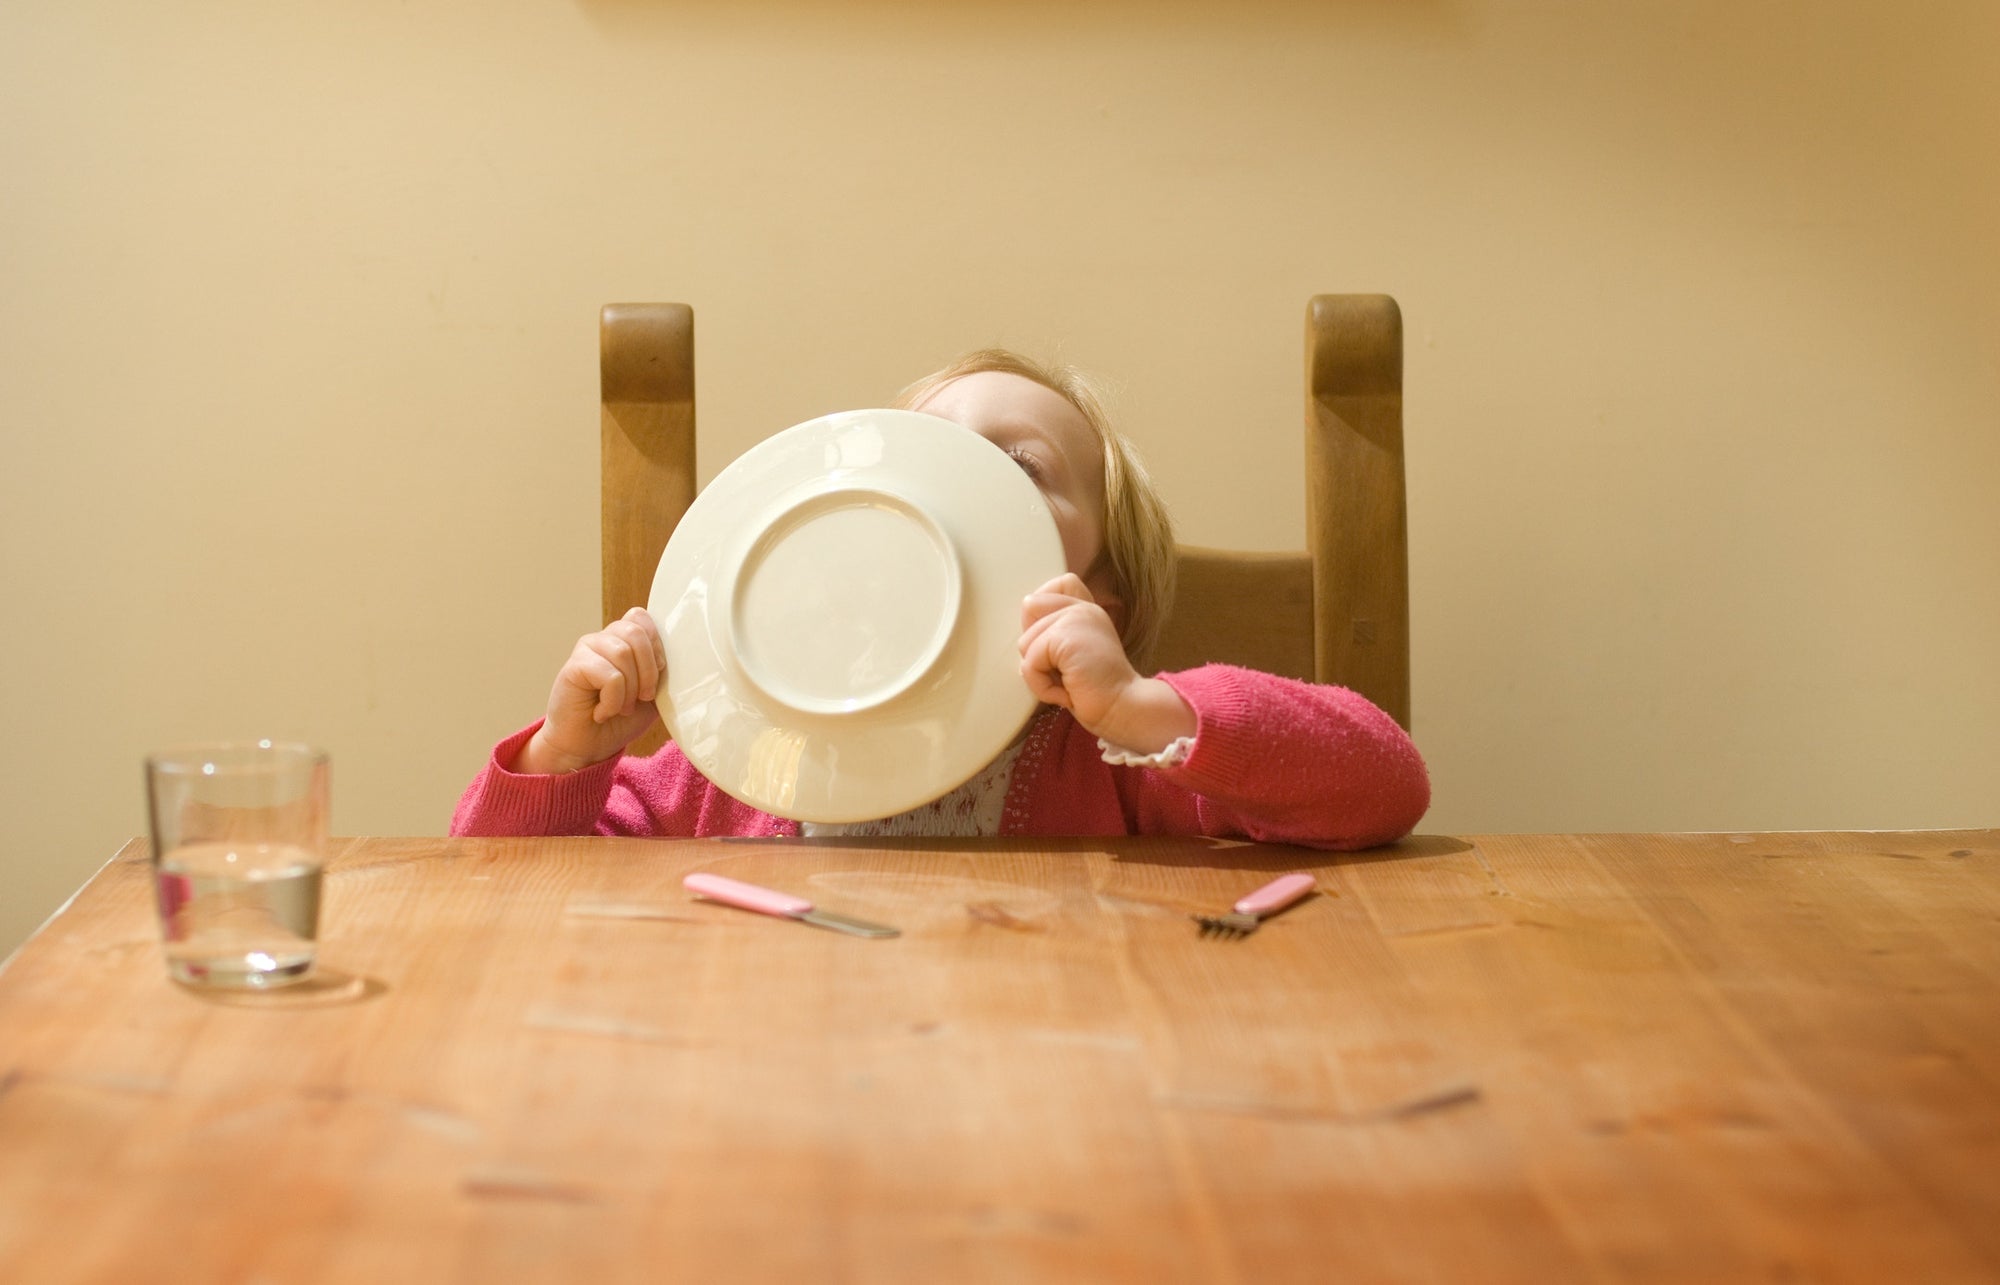 Child finishing food, cleaning plate using tongue, hiding face